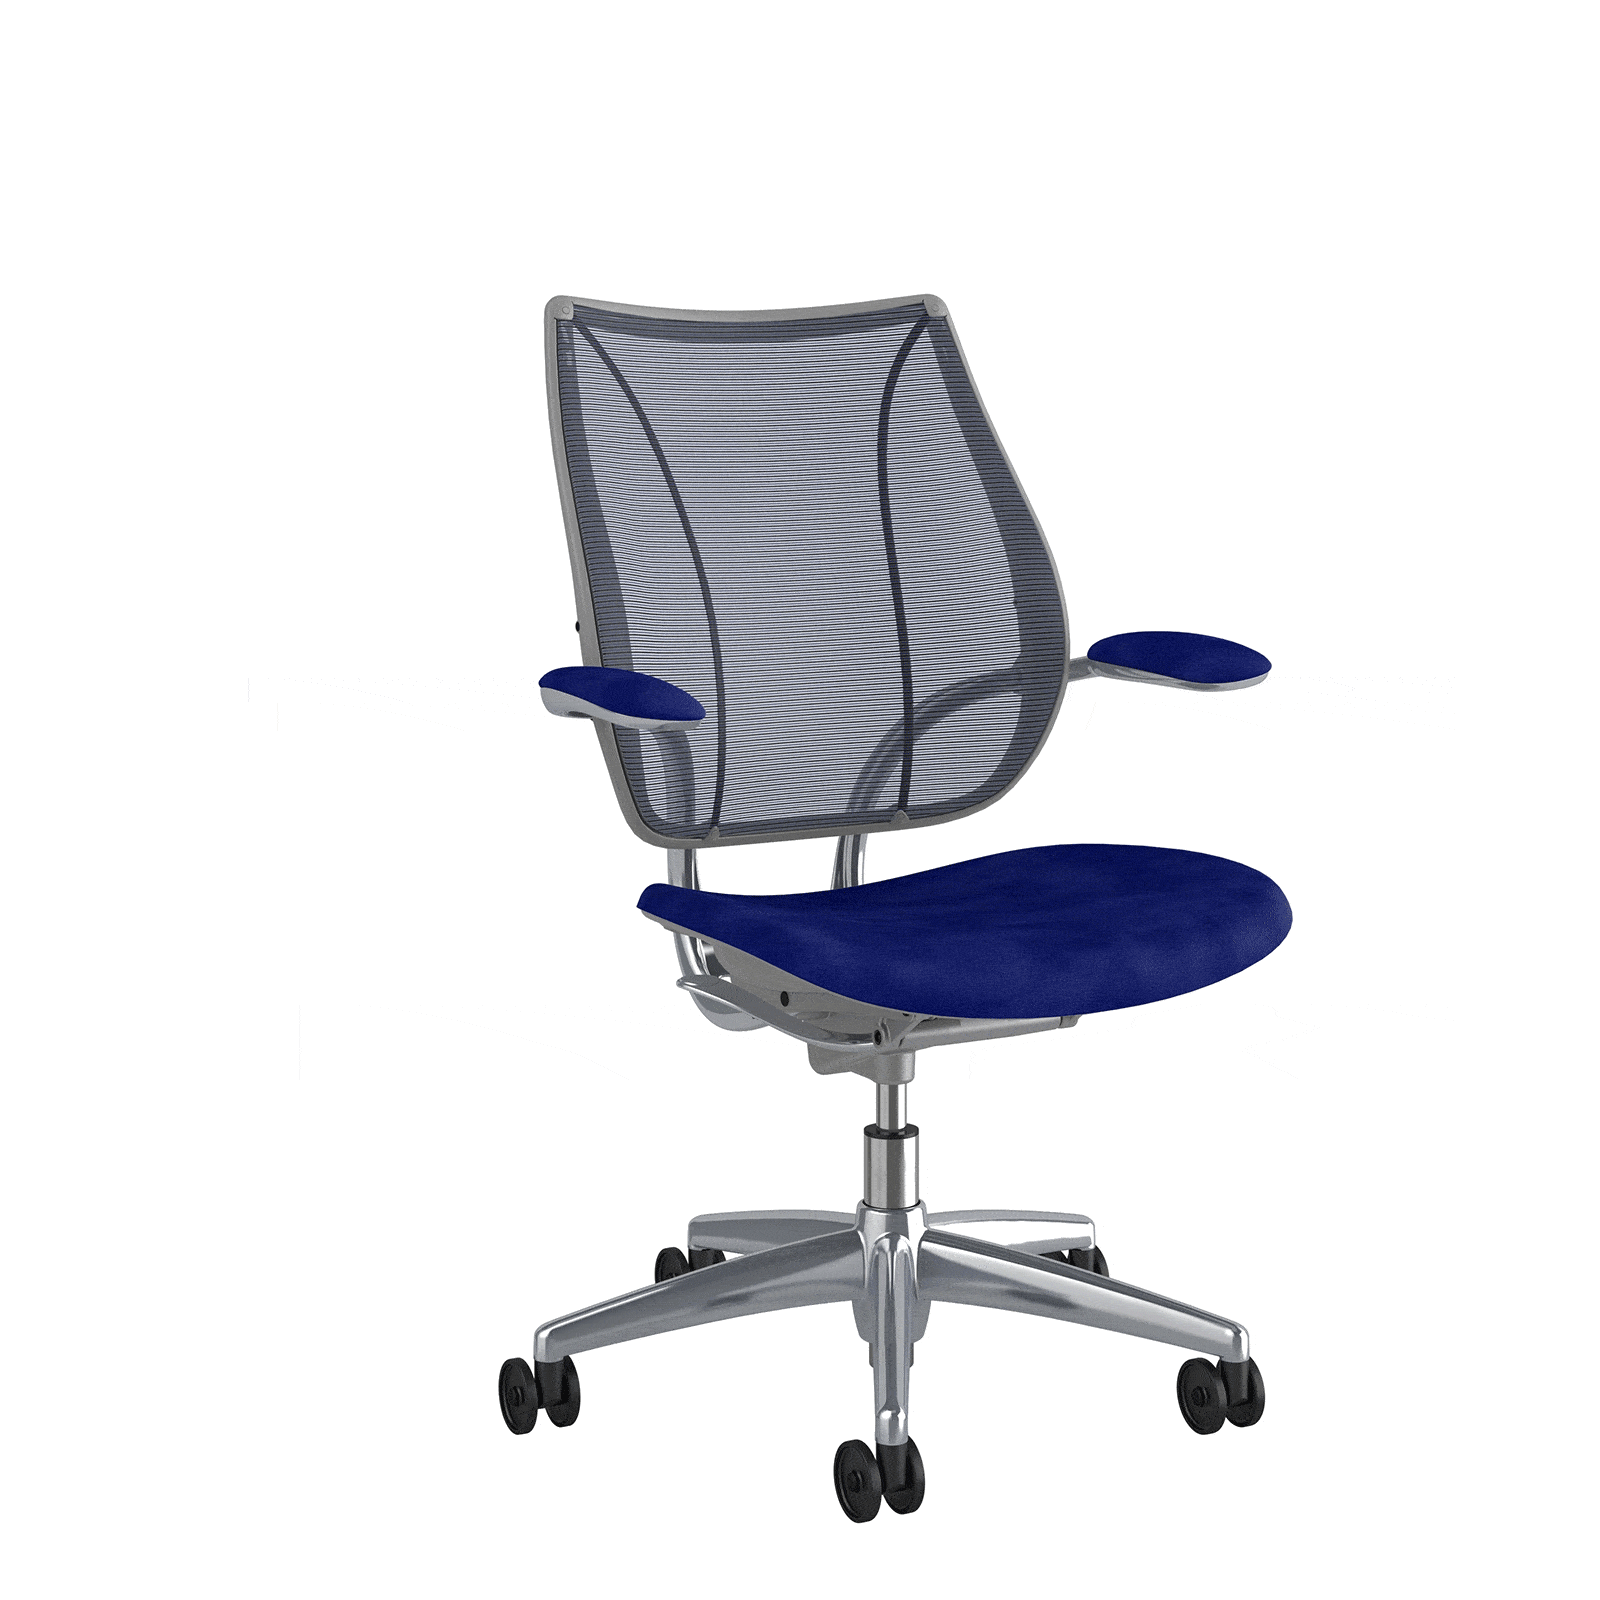 Humanscale Liberty Chair Zola: The perfect chair for your active and stylish workspace